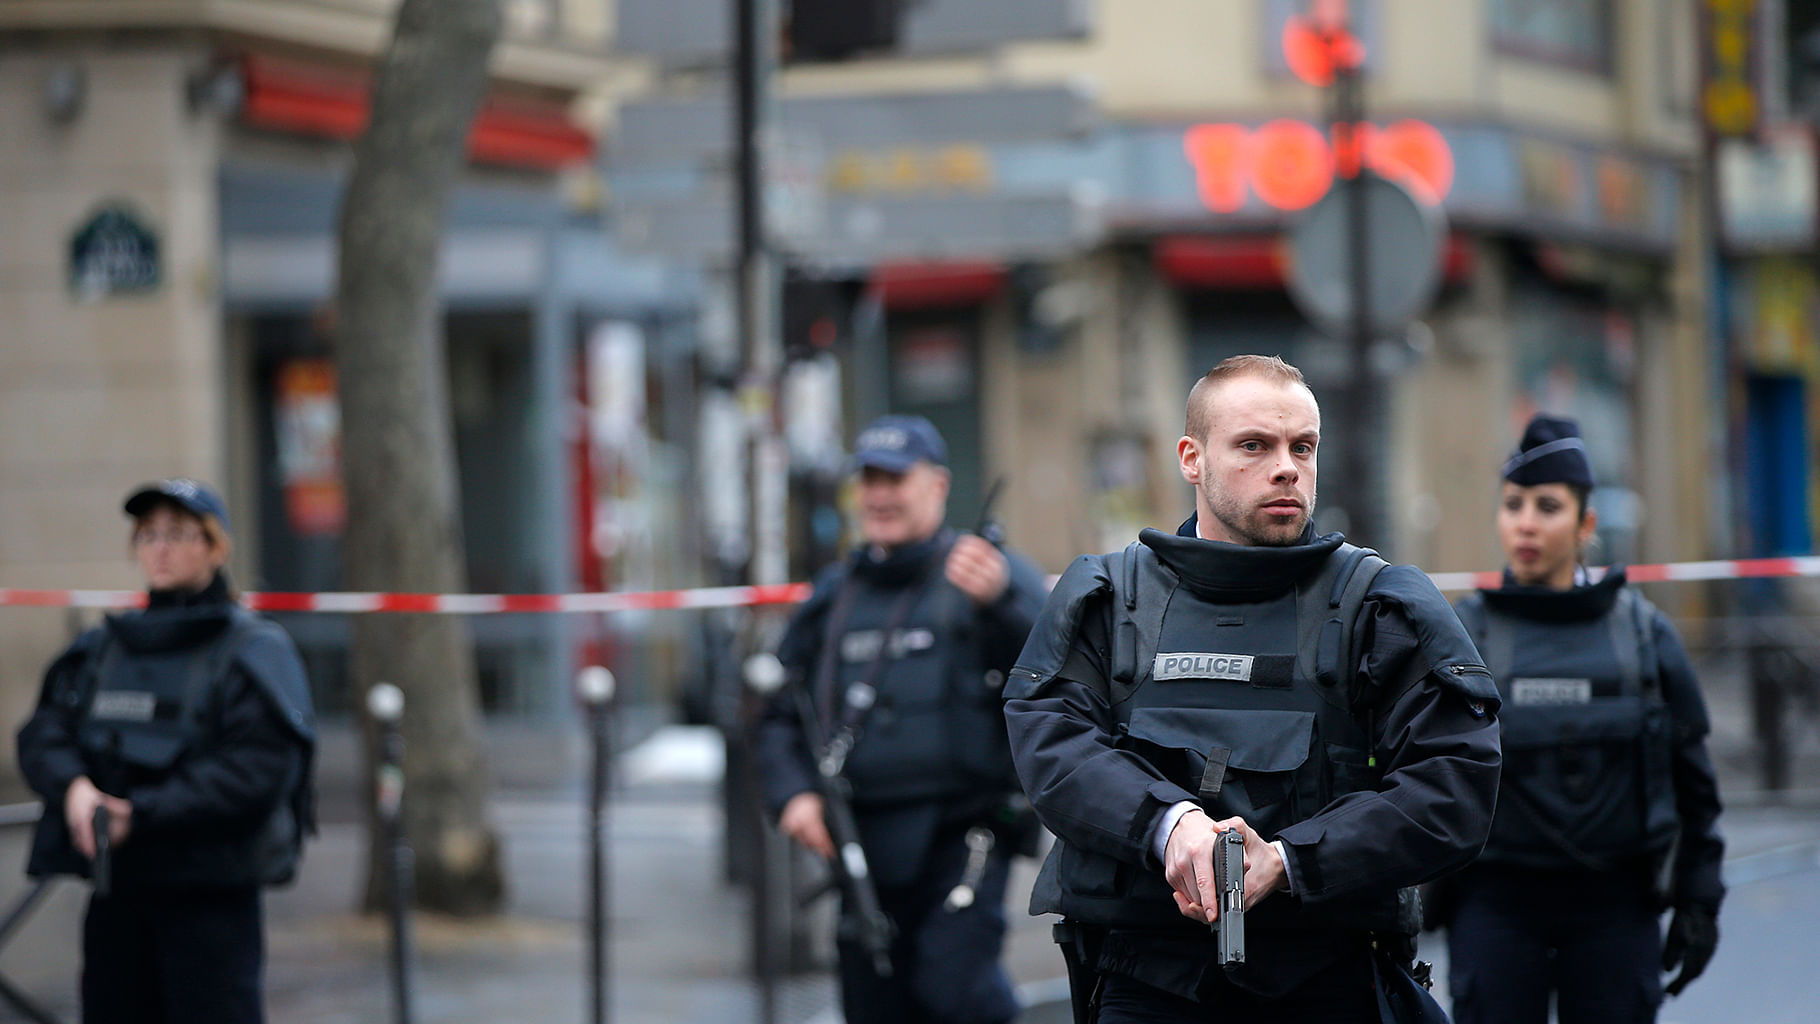 Police officers secure the perimeter near the scene of a fatal shooting which took place at a police station in Paris on January 7, 2016. (Photo: AP)